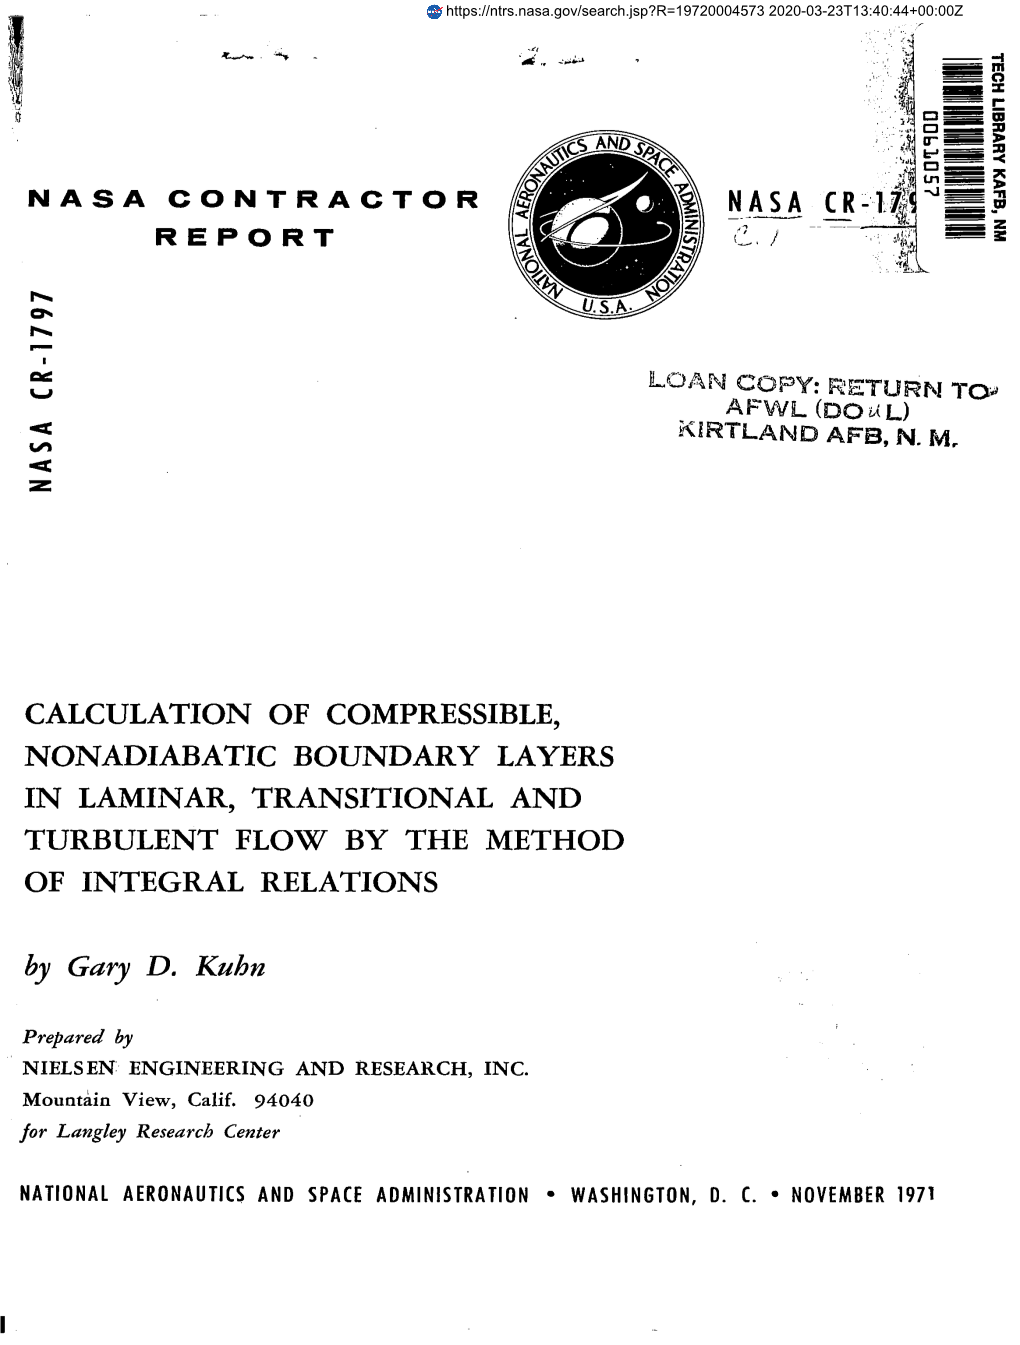 CALCULATION of COMPRESSIBLE, NONADIABATIC BOUNDARY LAYERS in 1 November 1971 LAMINAR, TRANSITIONAL and TURBULZNT FLOW by W METHOD of 6